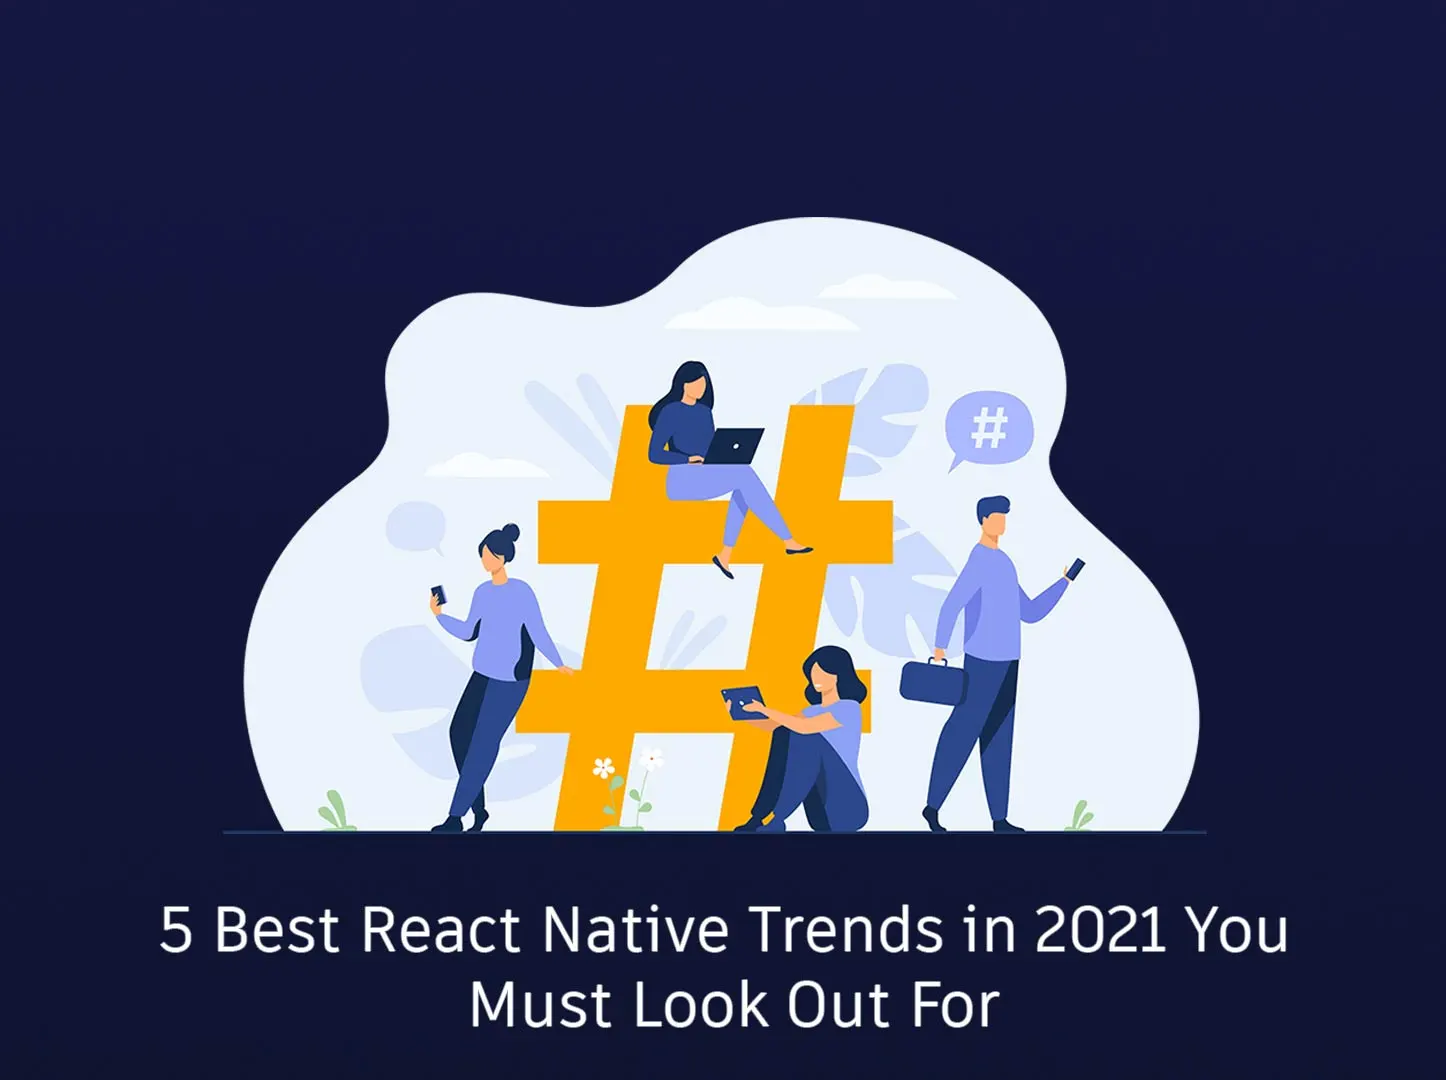 5 Best React Native Trends in 2021 You Must Look Out For